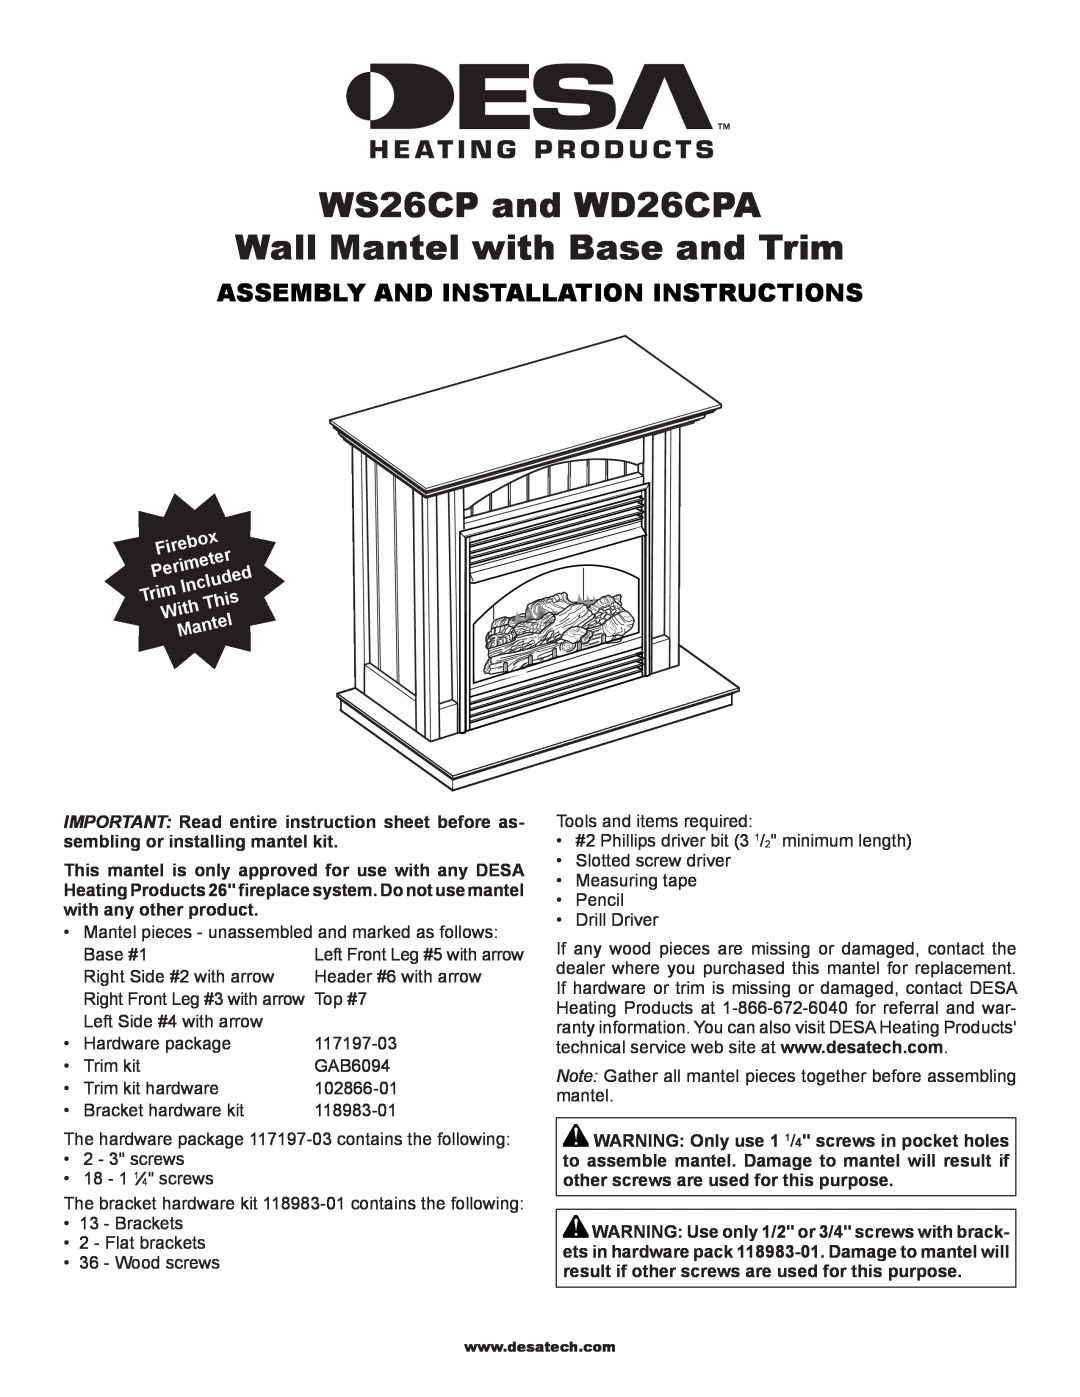 Desa installation instructions WS26CP and WD26CPA Wall Mantel with Base and Trim, Firebox, Perimeter, Included, This 